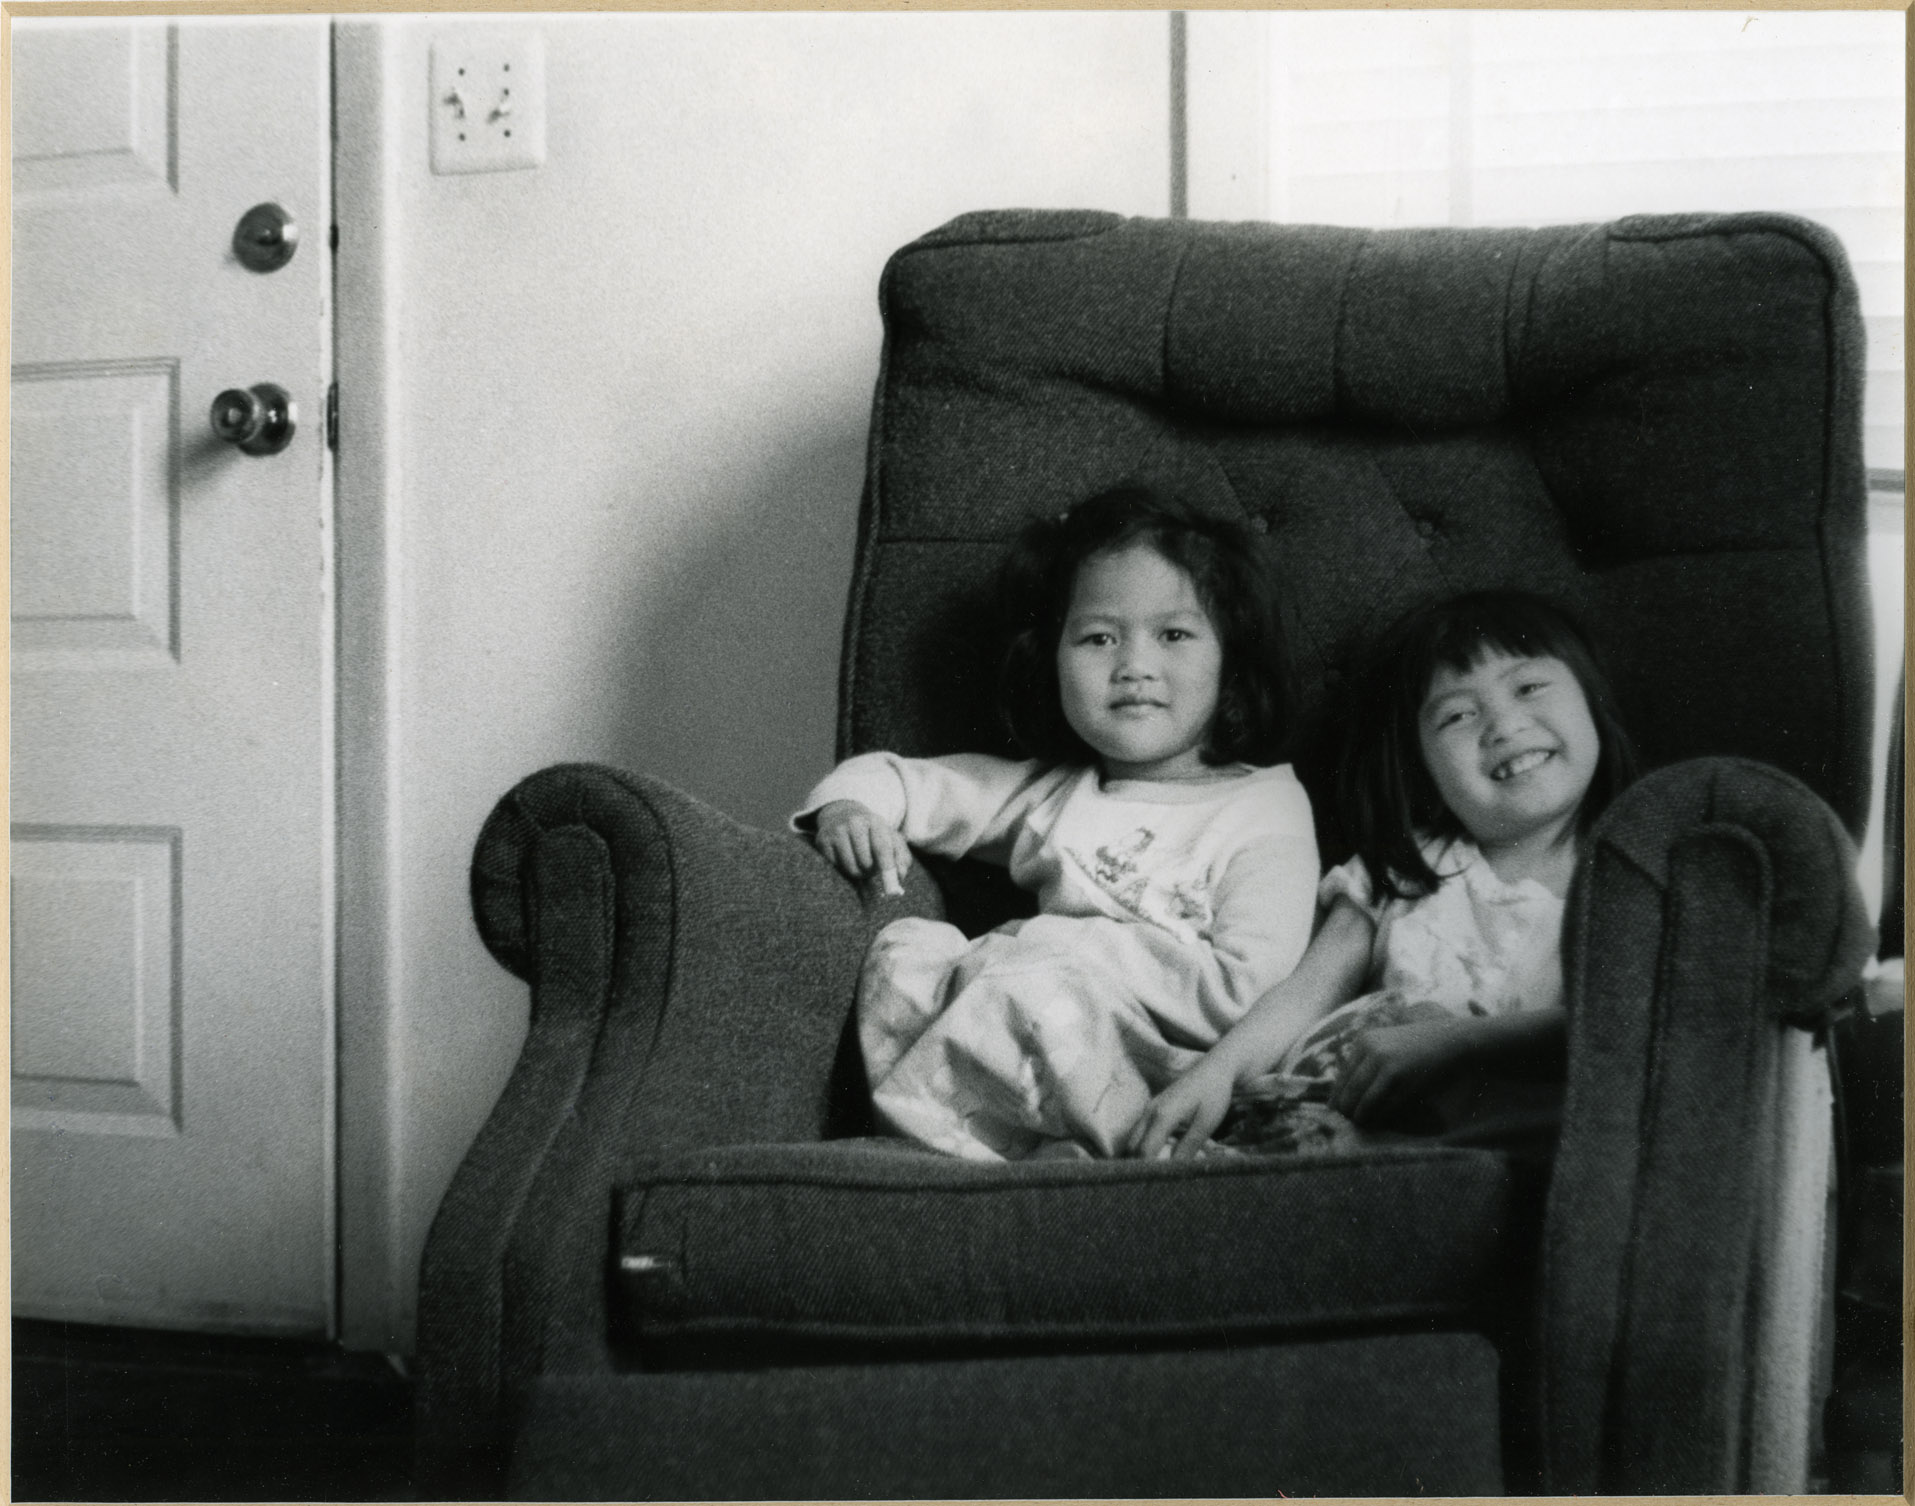 Depiction of At home, photo by Cham Nan Koy, 1982